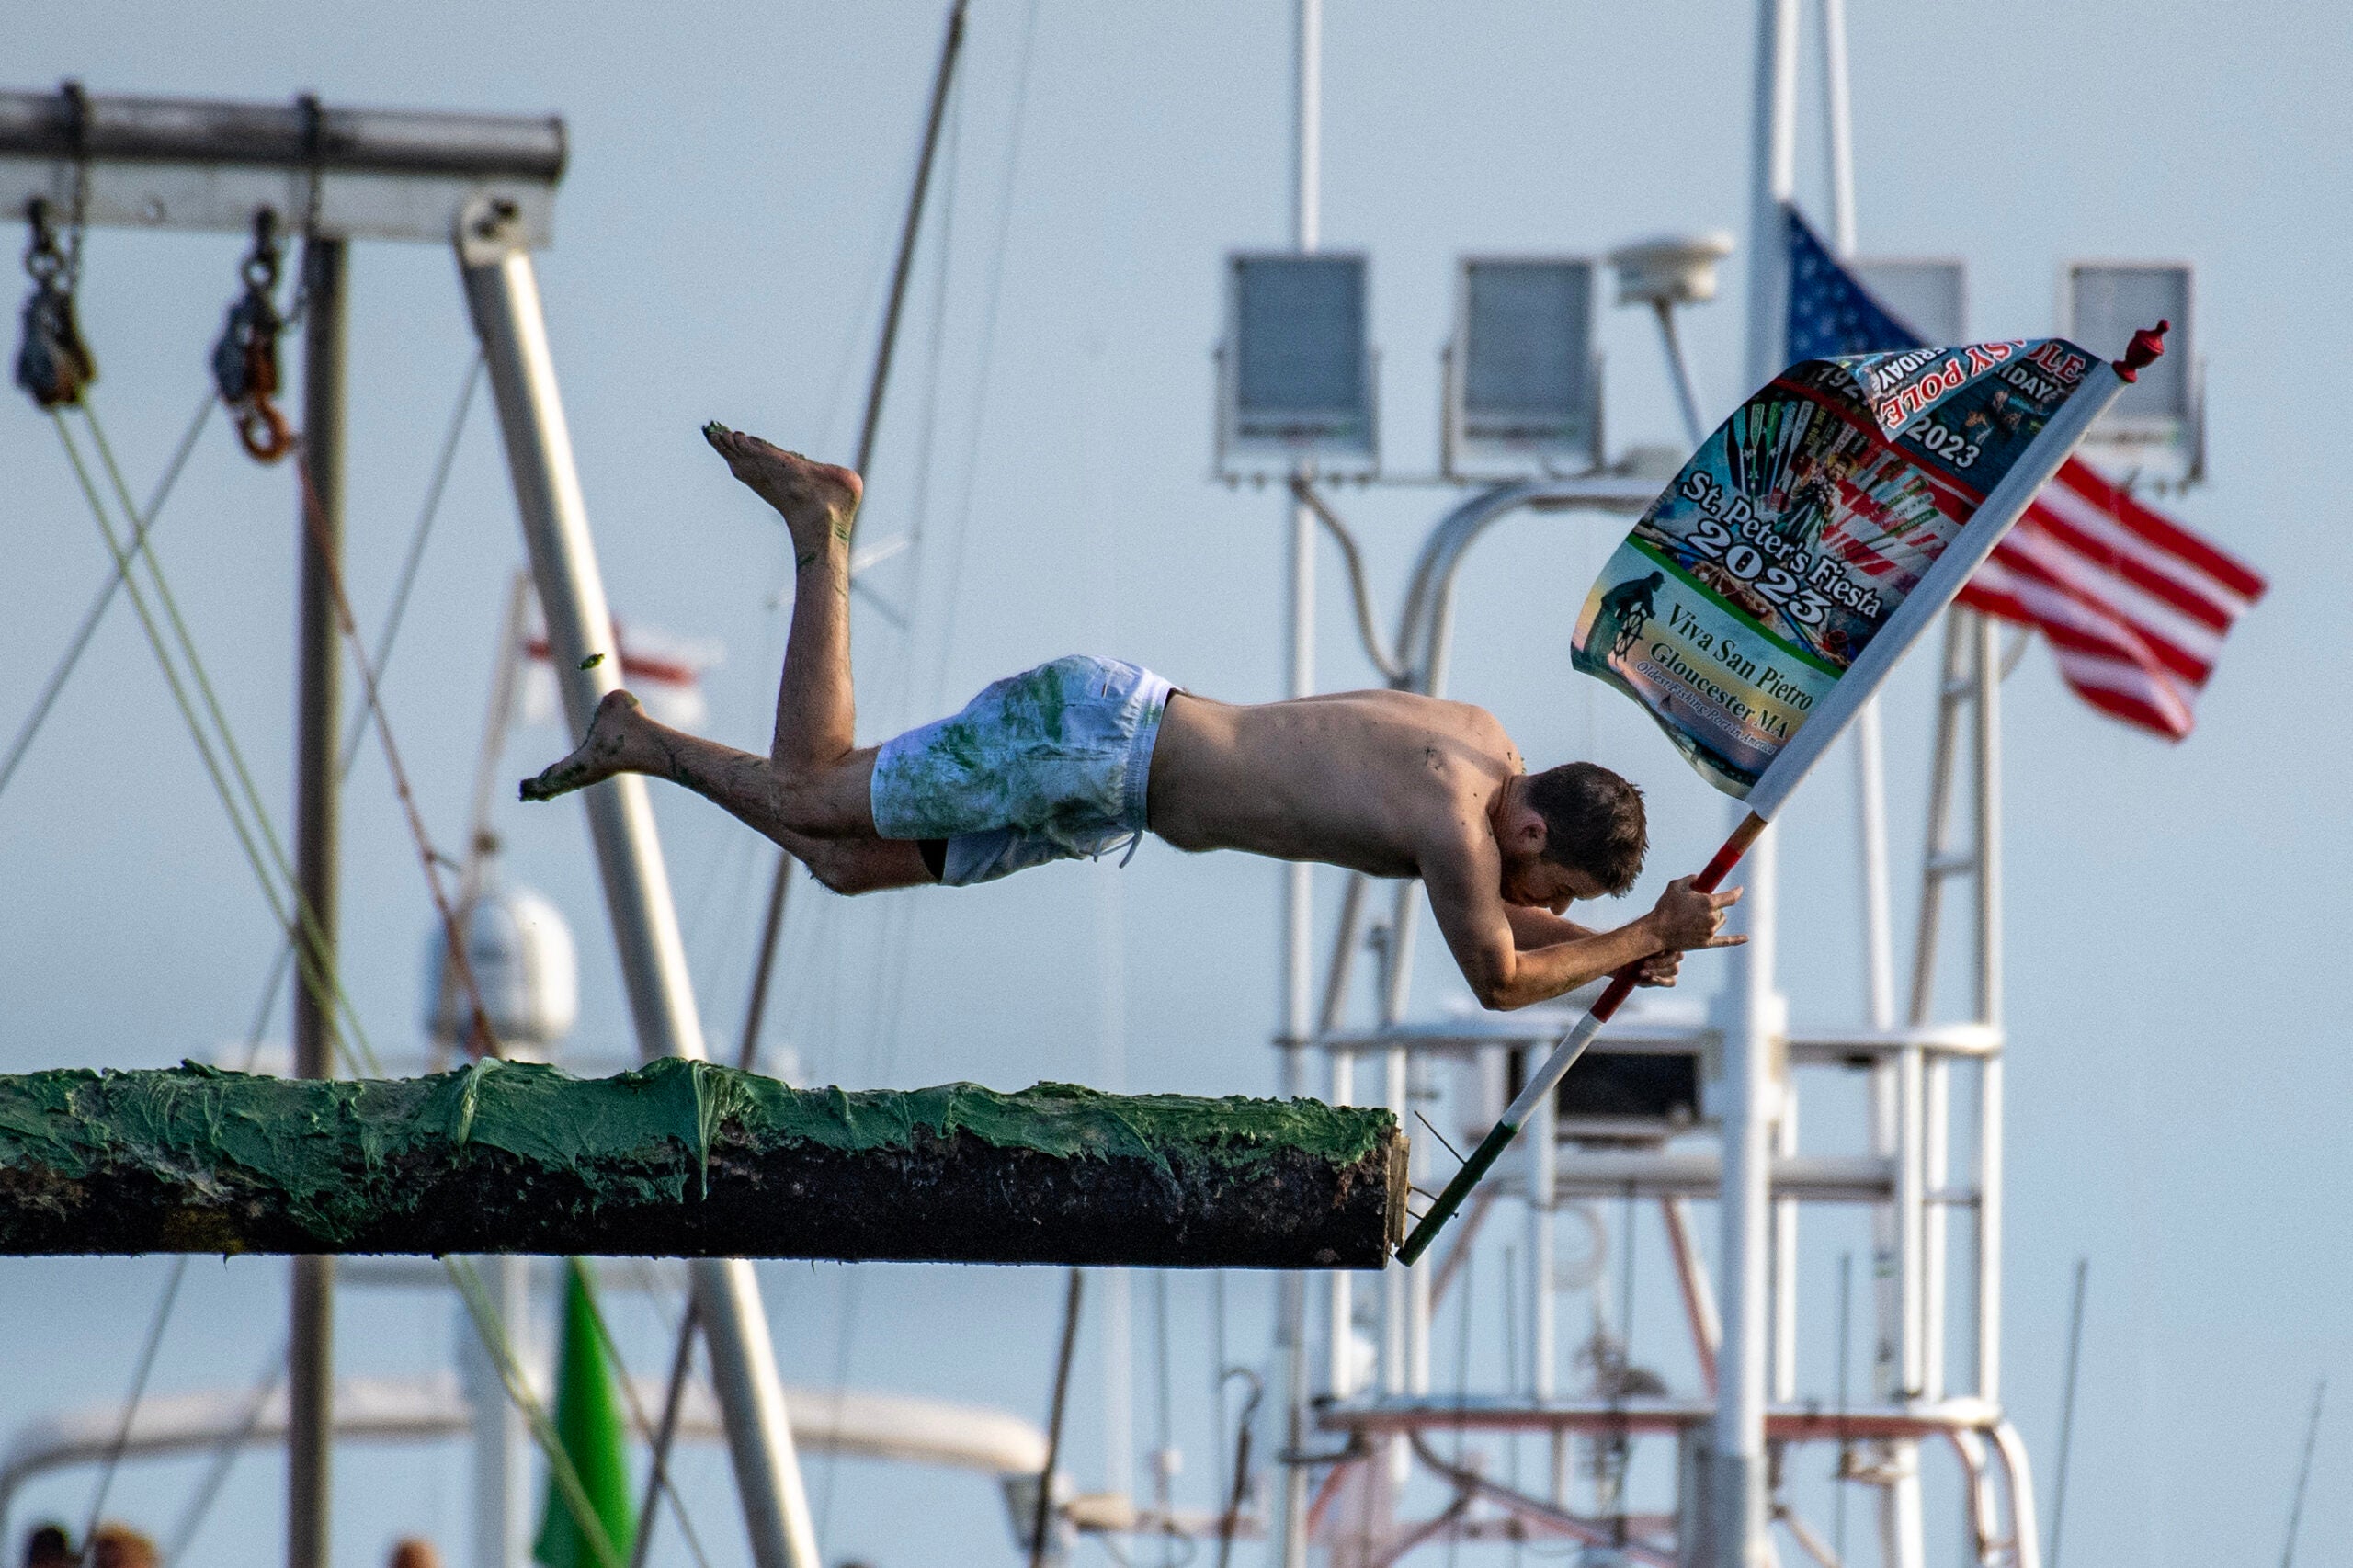 Greasy pole competition returns to St. Peter's Fiesta in Gloucester